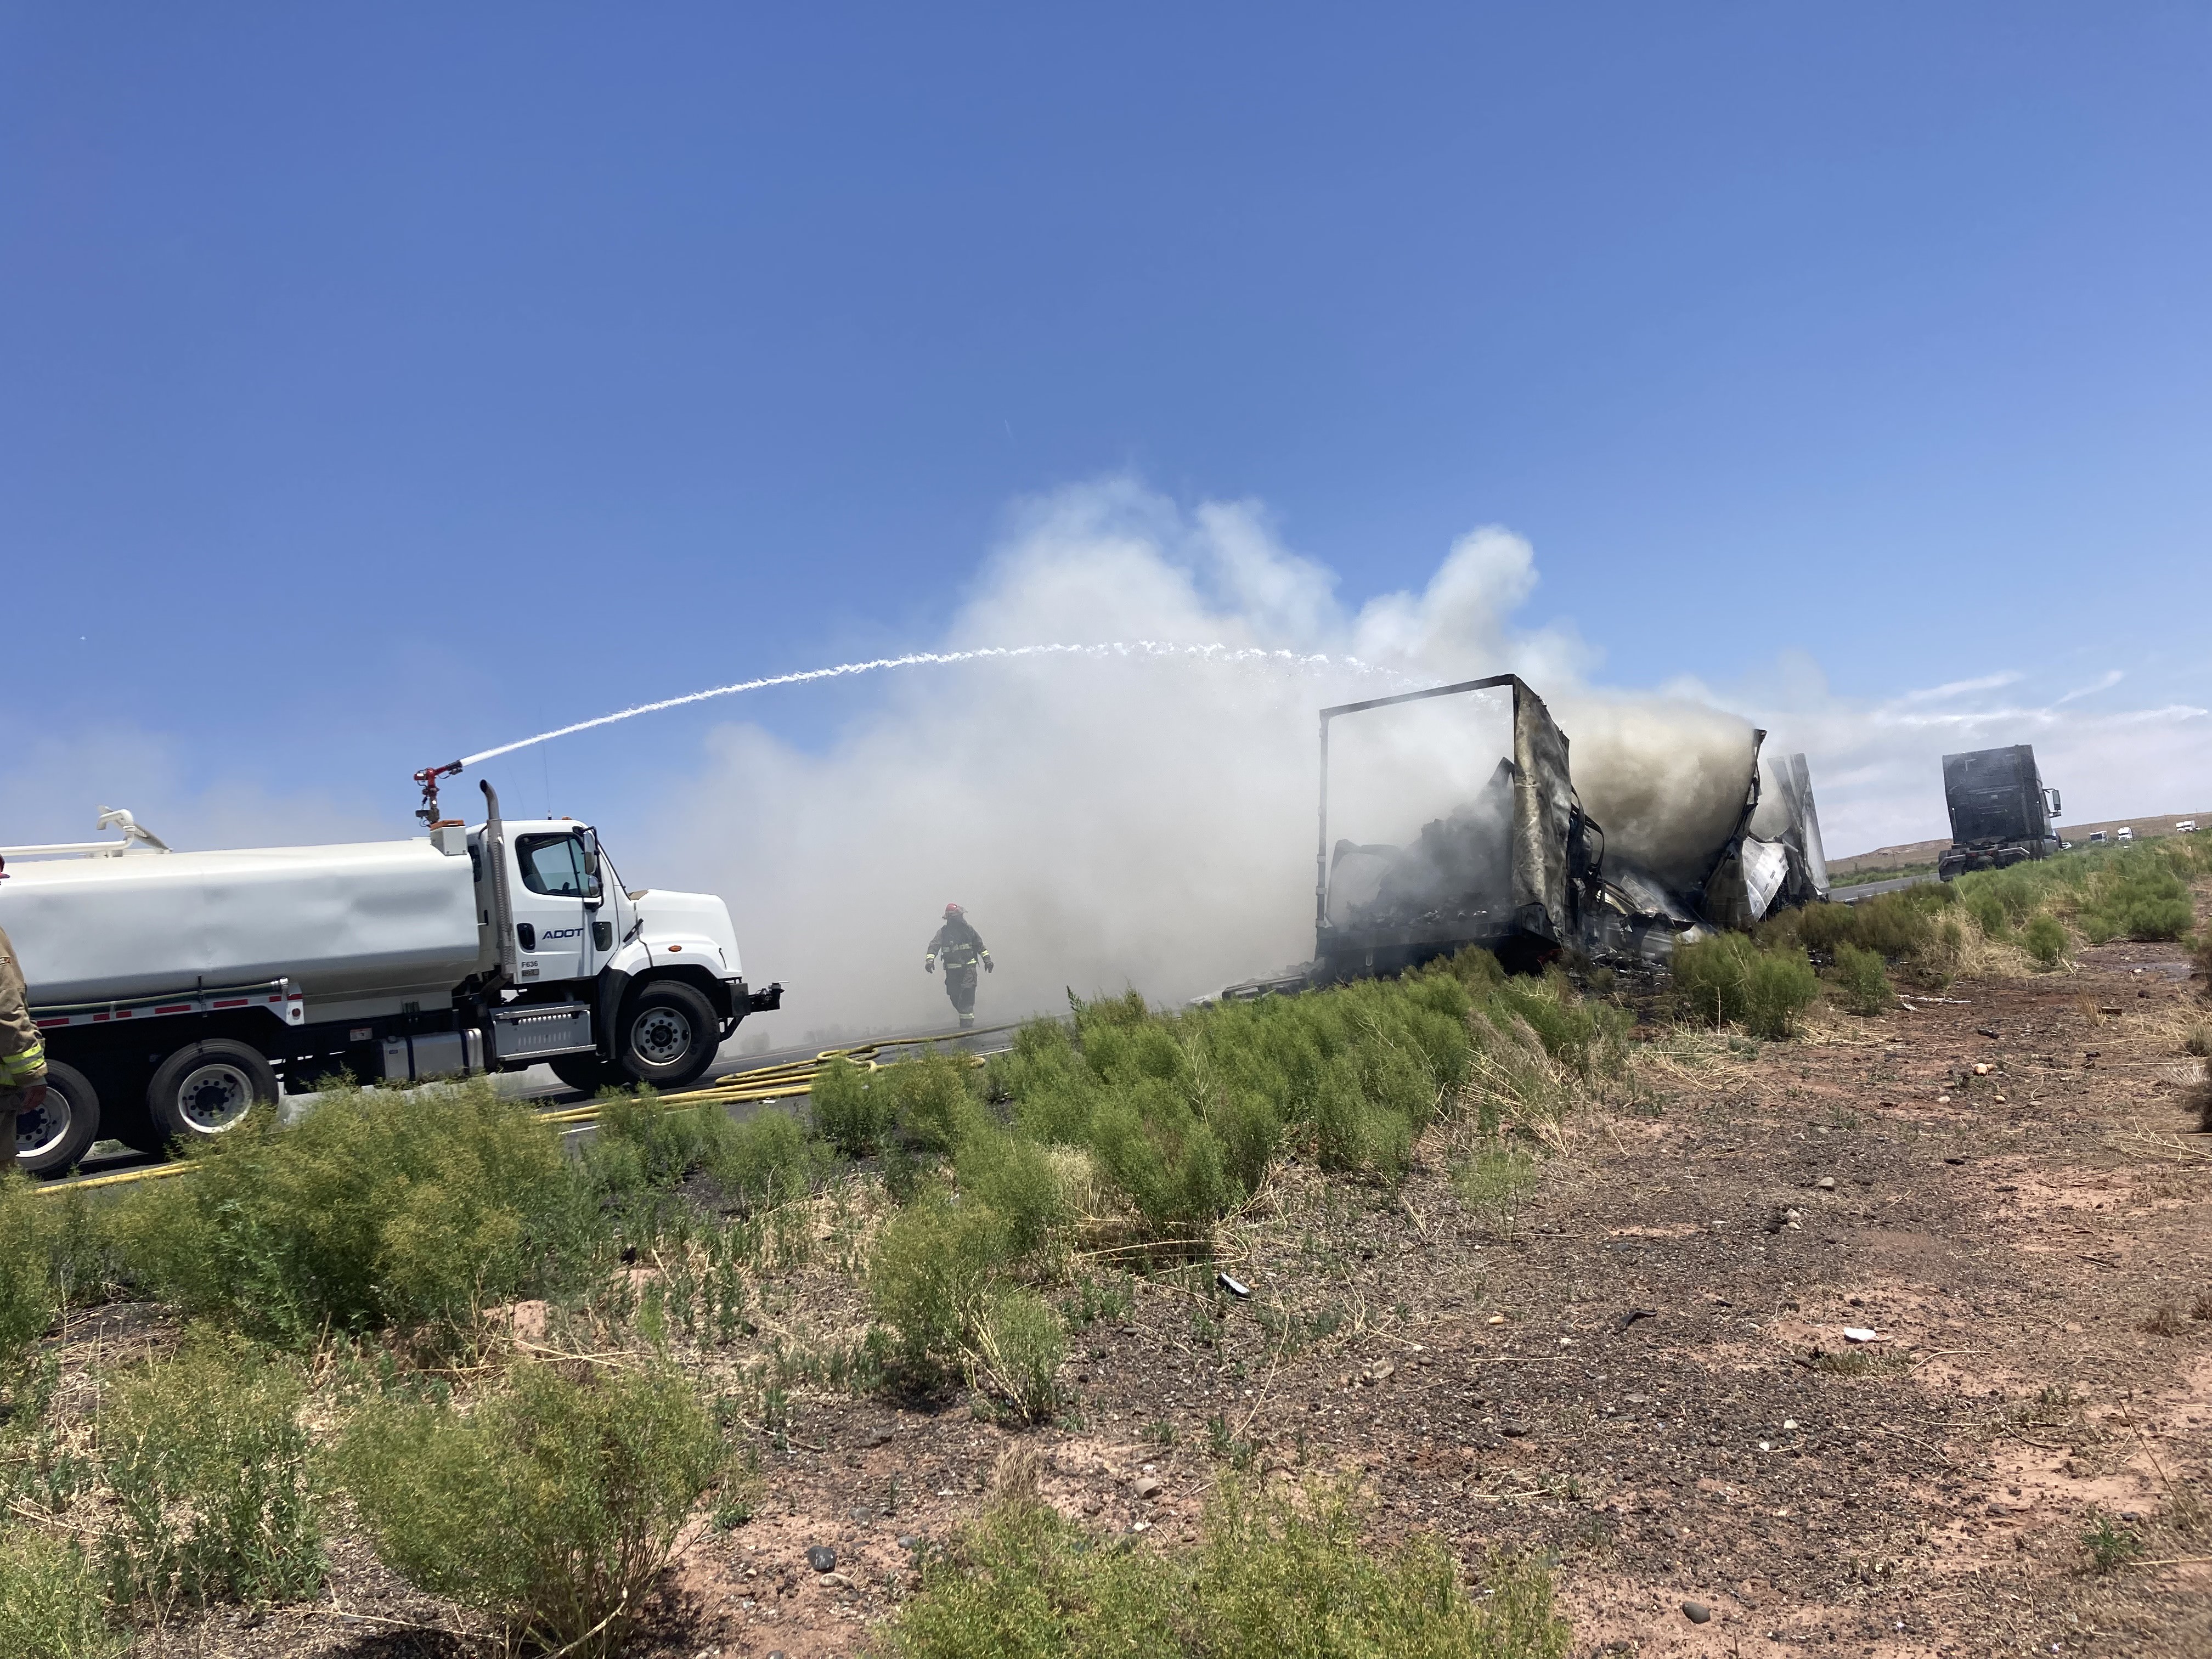 A water tanker puts out a vehicle fire on the highway